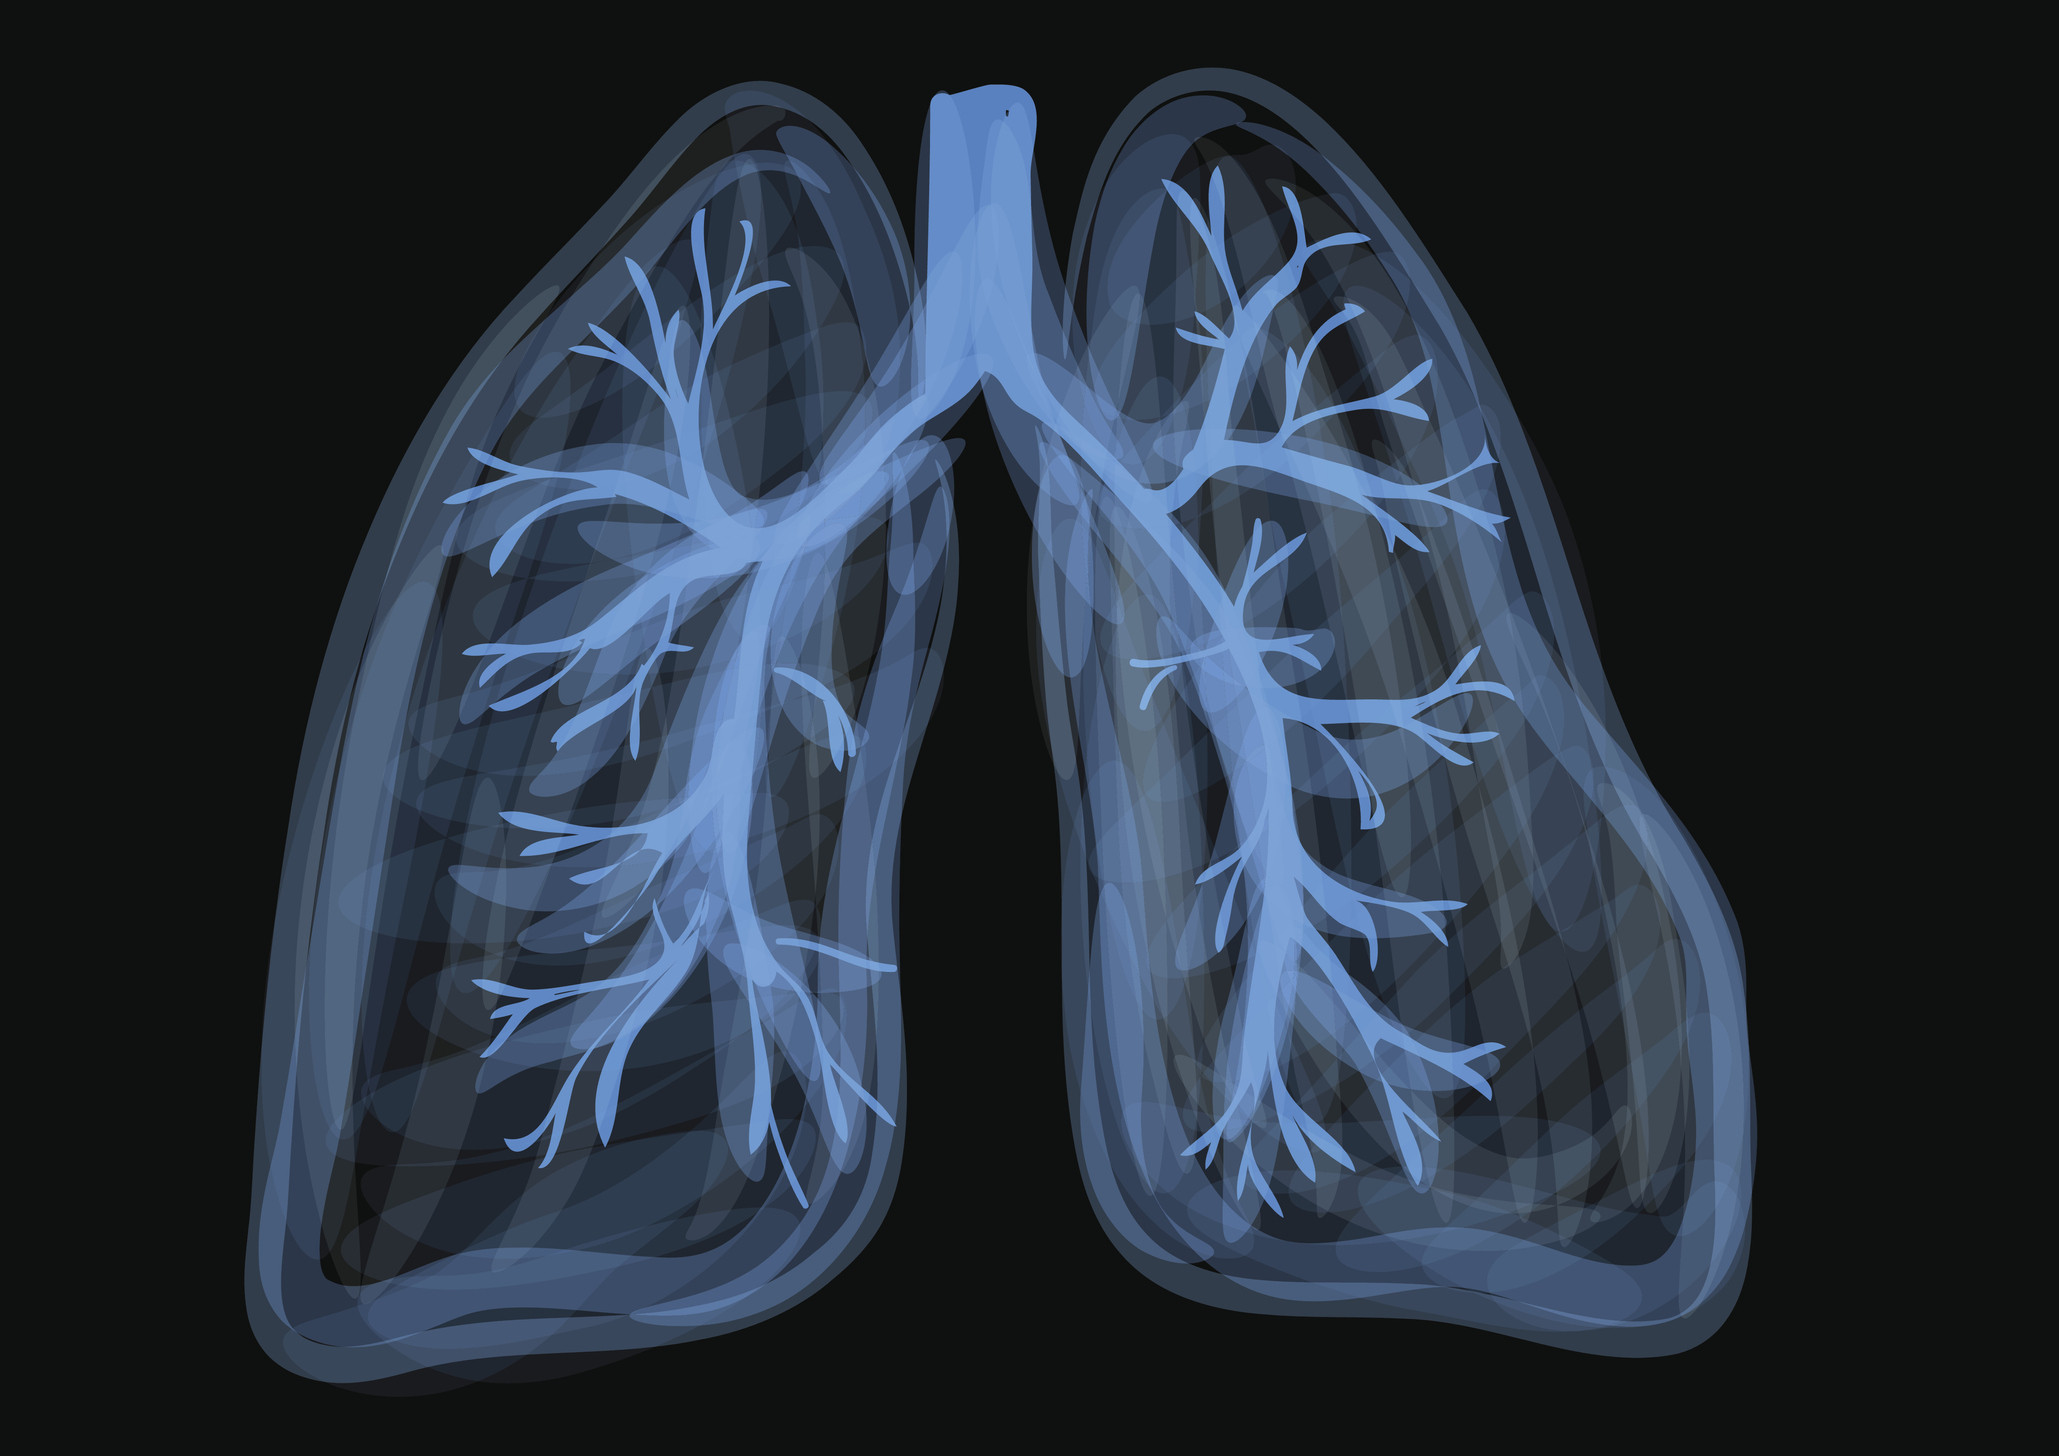 image of lungs. blue abstract respiratory organ on black background